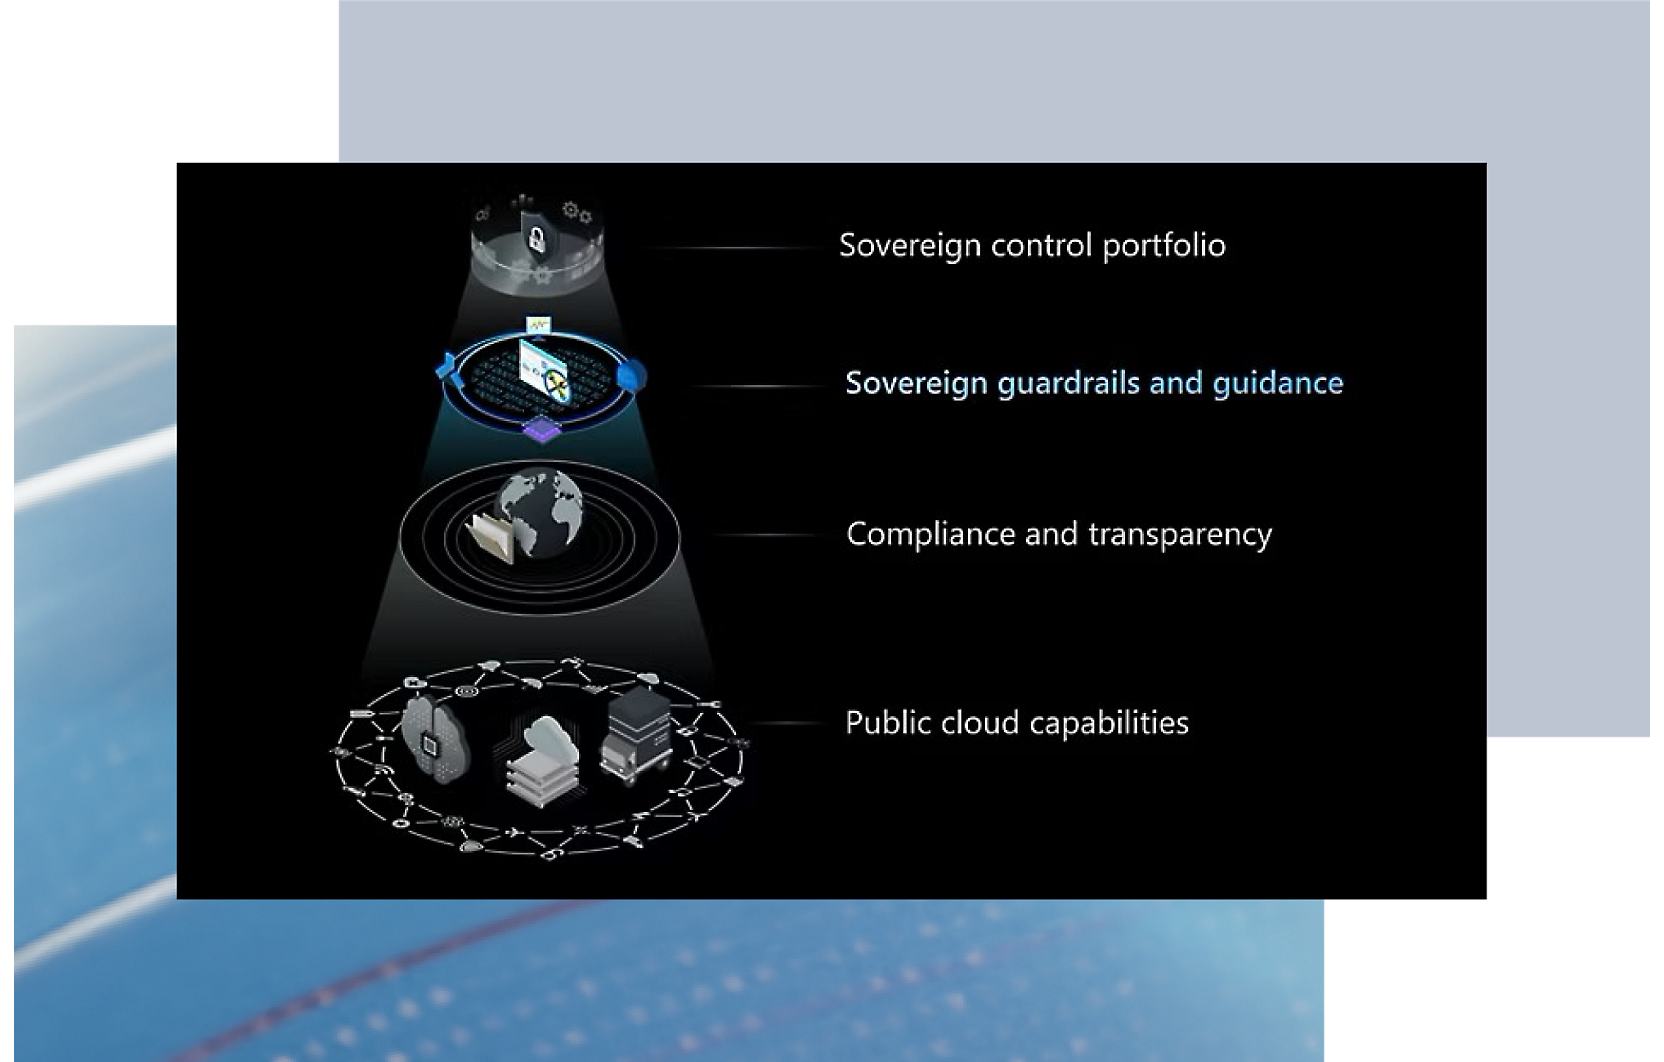 Portfolio oversight, guardrails, compliance, and cloud capabilities for sovereign entities